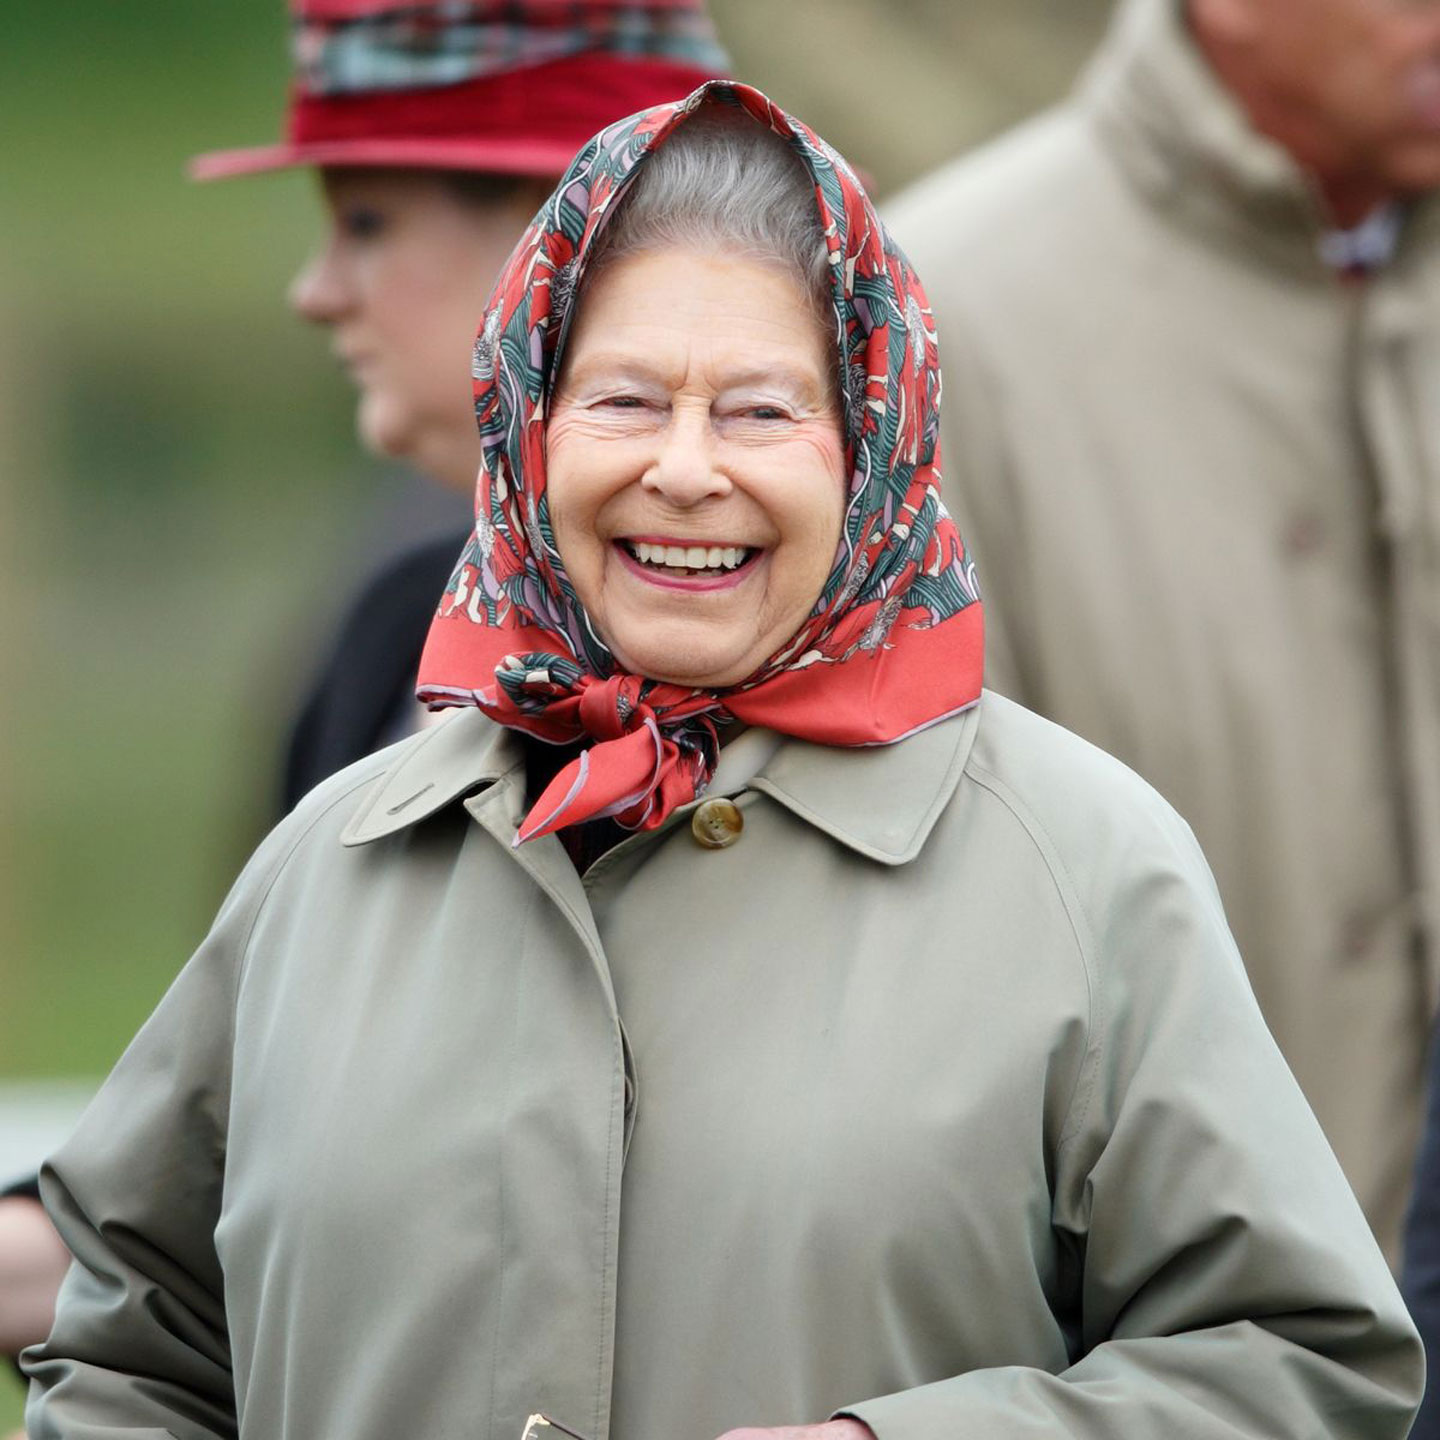 Queen Elizabeth II watches her horse 'Balmoral Fashion' compete in the Fell Class on day 3 of the Royal Windsor Horse Show in Home Park on May 15, 2015 in Windsor, England